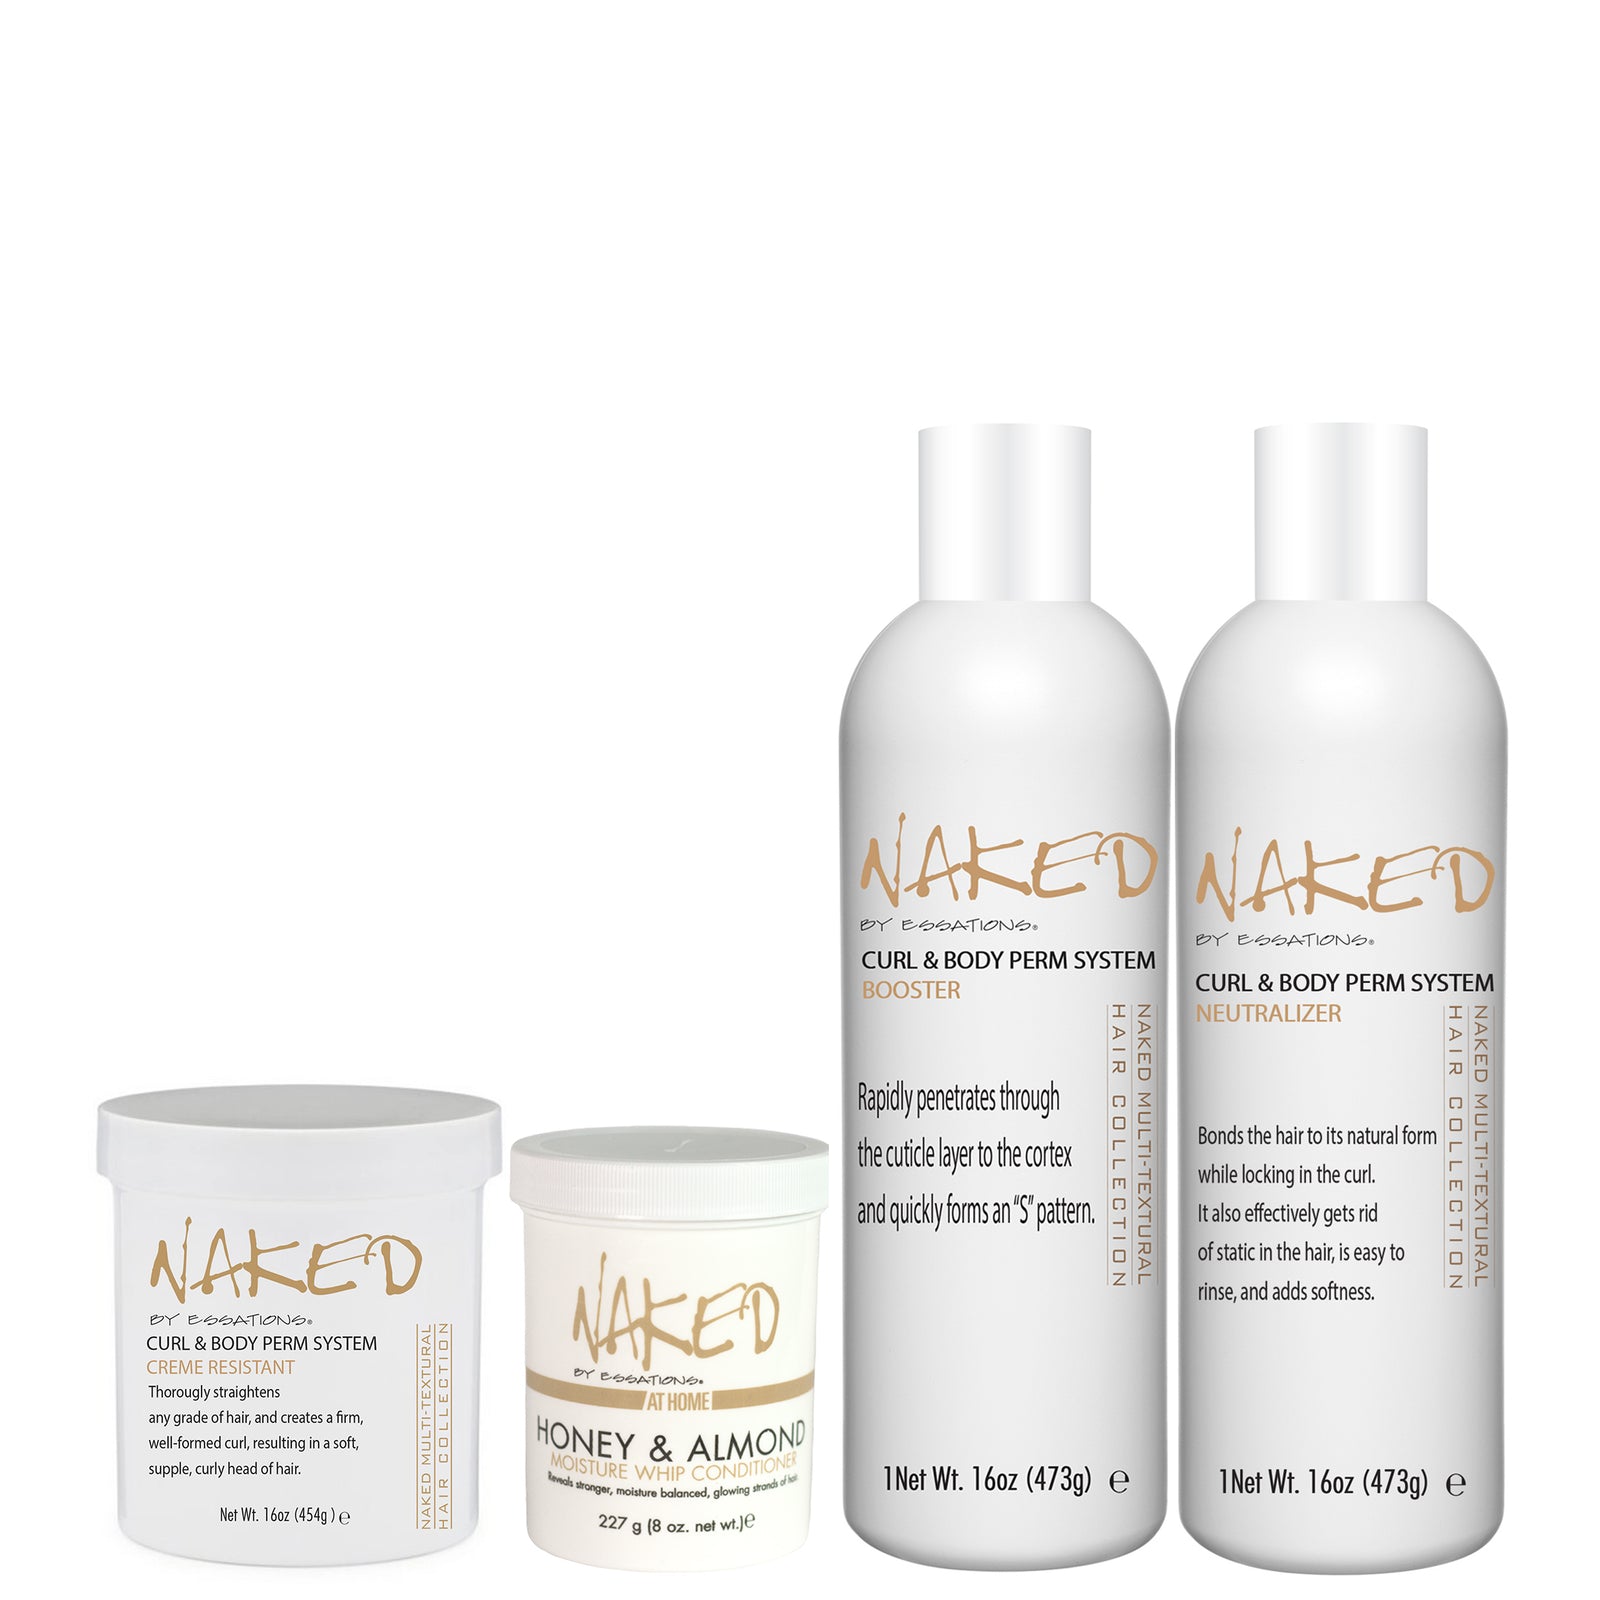 Naked by Essations Collection - EssationsPro